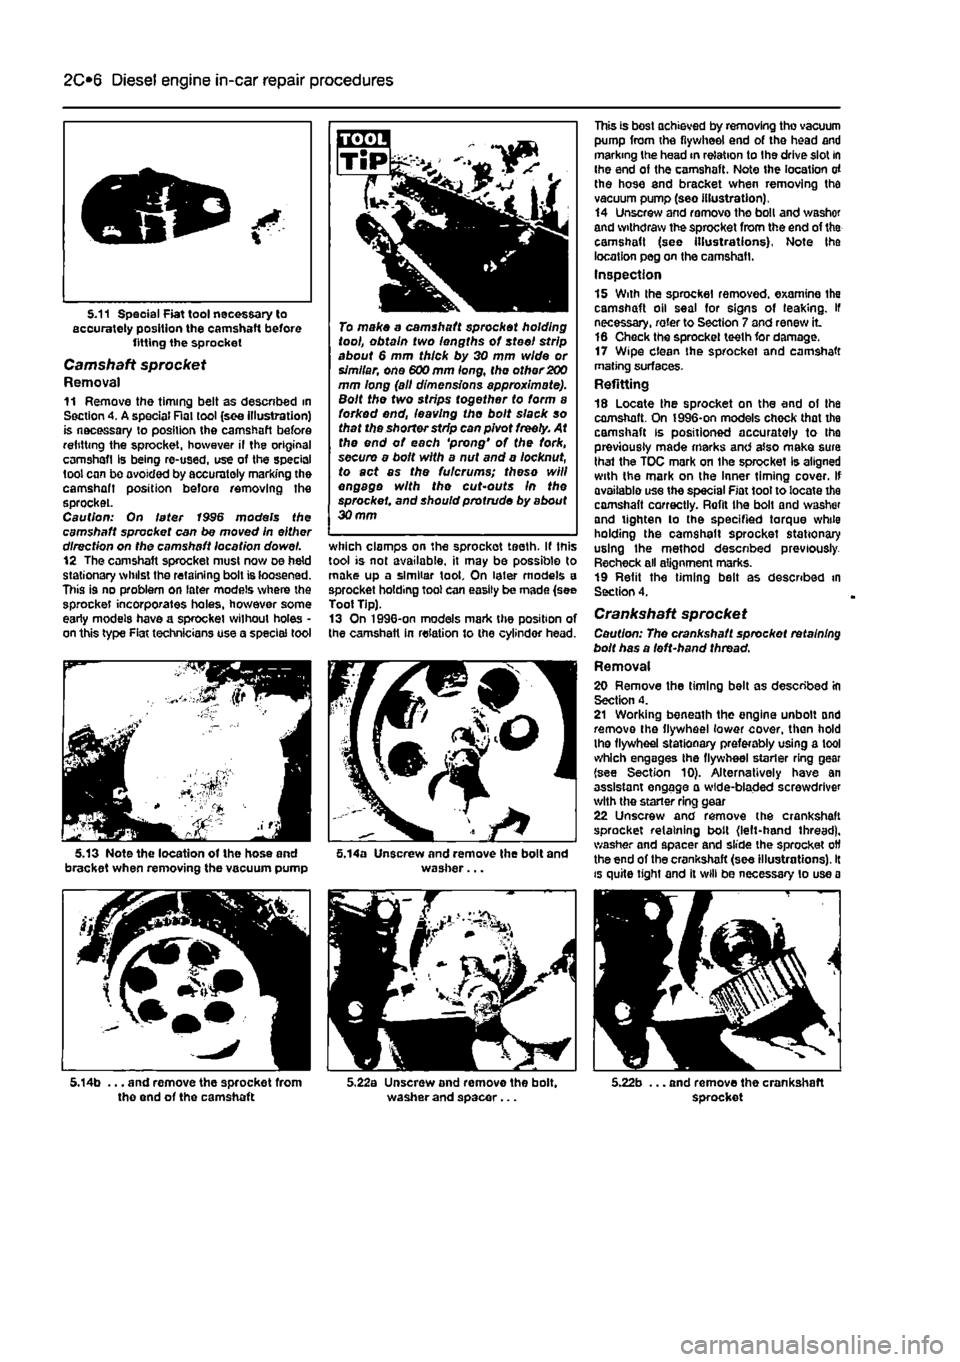 FIAT PUNTO 1994 176 / 1.G Manual PDF 
2C*2 Diesel engine in-car repair procedures 
5.11 Special Fiat tool necessary to accurately position the camshaft before fitting the sprocket 
Camshaft sprocket Removal 11 Remove the timing belt as d